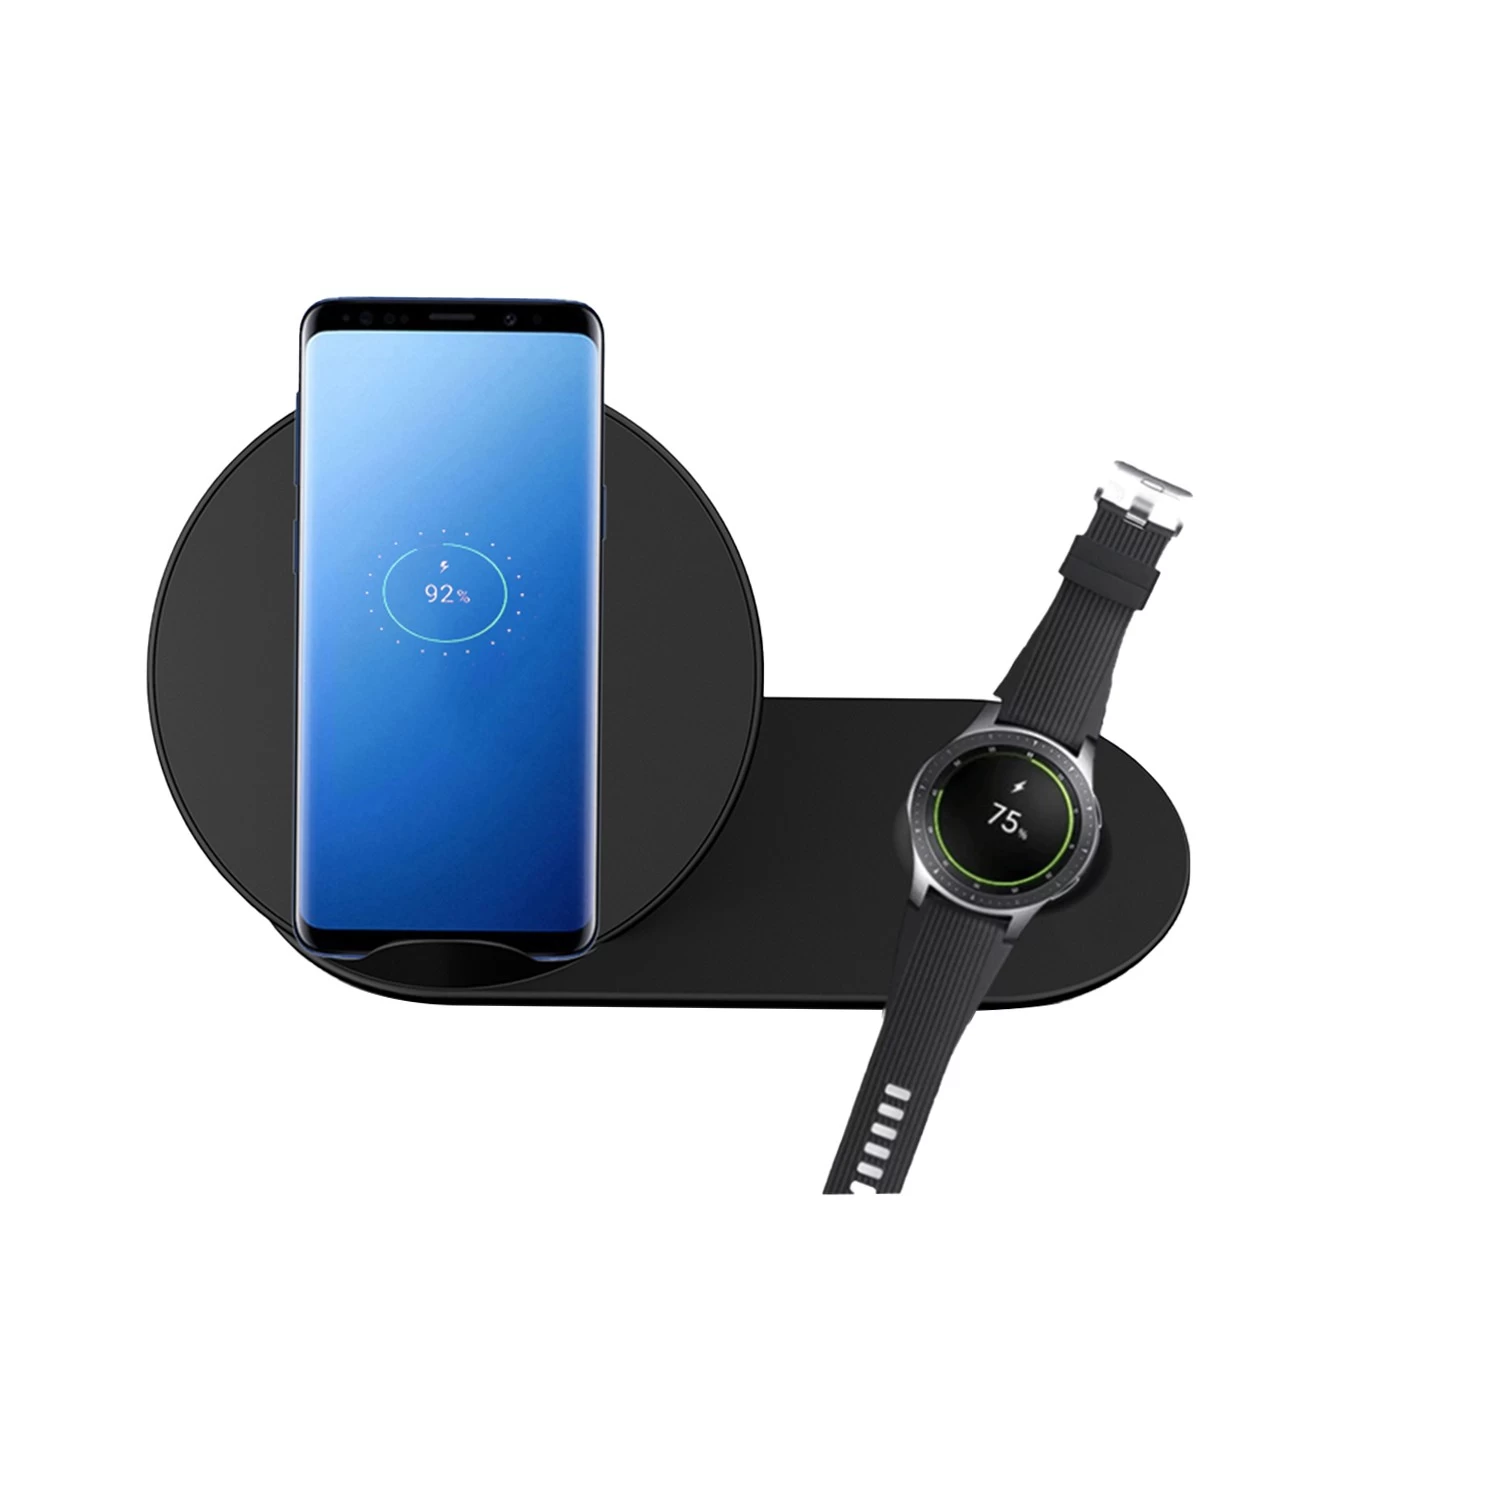 China Shenzhen New Design 2 in 1 Wireless Charging Pad for iPhone XS Max/XS/XR/X/8 Plus and Samsung Galaxy S9/S8 and Compatible with Samsung Watches(MH-Q440B) manufacturer